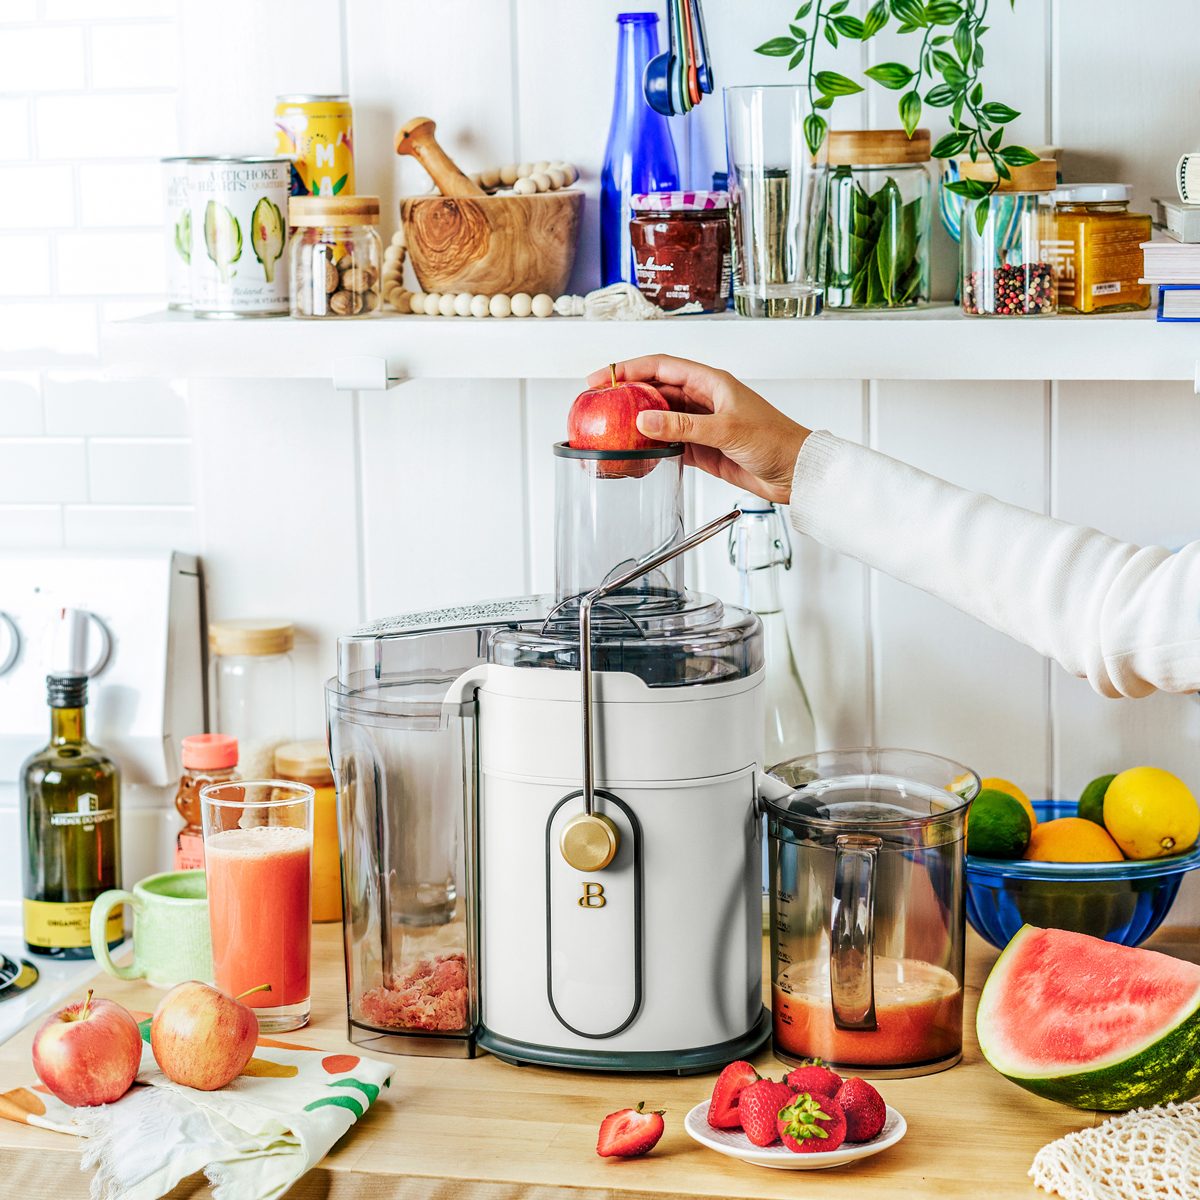 https://www.tasteofhome.com/wp-content/uploads/2023/11/Electric-Juicer-Via-Merchant-DH-TOH-Best-Drew-Barrymore-Home-Products.jpg?fit=700%2C700